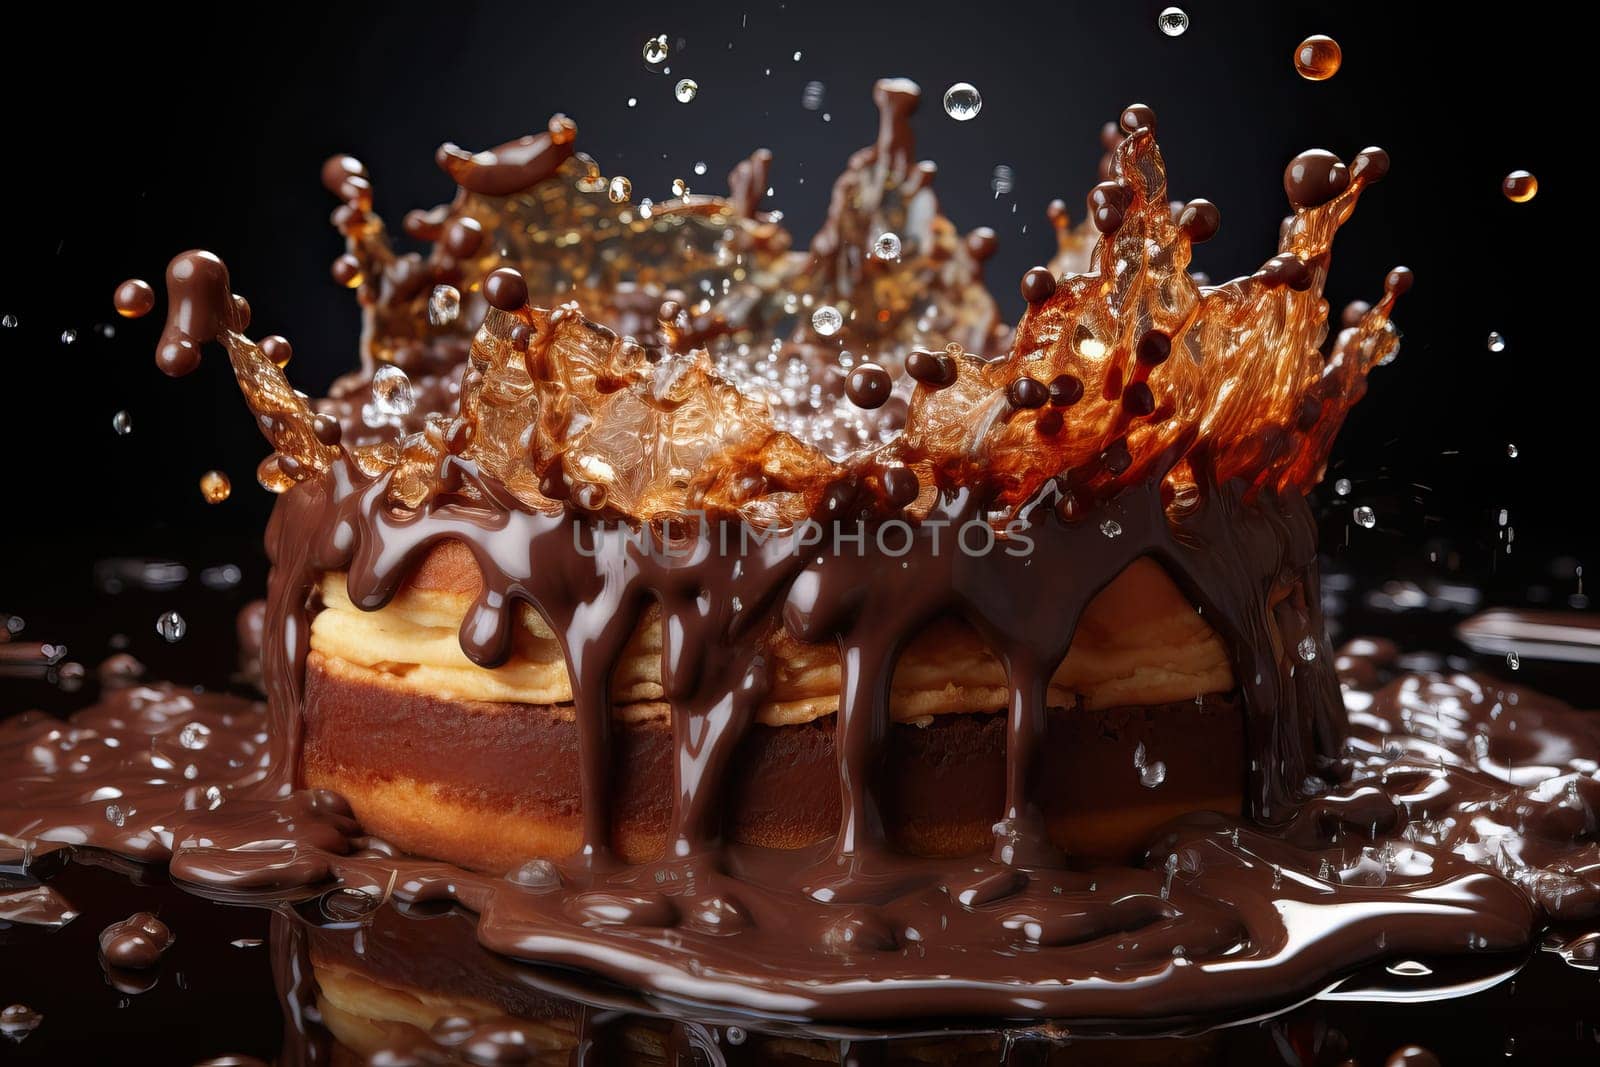 Splash of chocolate on donuts in the shape of a crown on a black background, chocolate explosion.